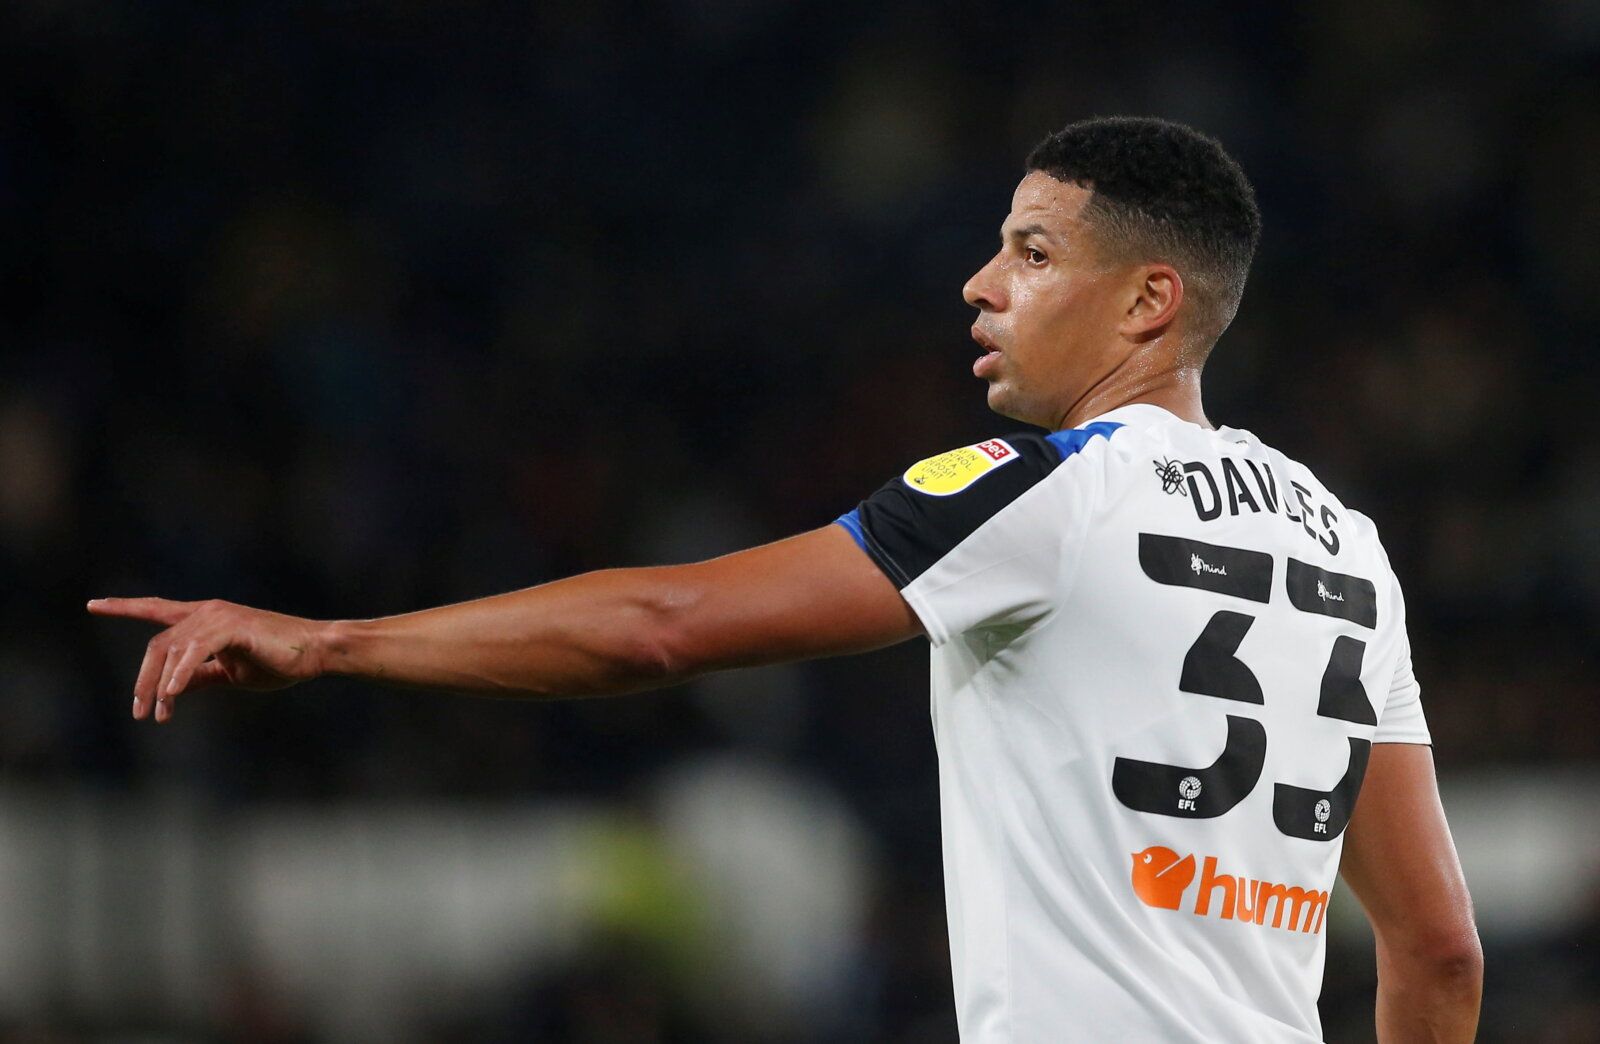 Soccer Football - Championship - Derby County v Reading - Pride Park, Derby, Britain - September 29, 2021 Derby County's Curtis Davies   Action Images/Craig Brough  EDITORIAL USE ONLY. No use with unauthorized audio, video, data, fixture lists, club/league logos or 